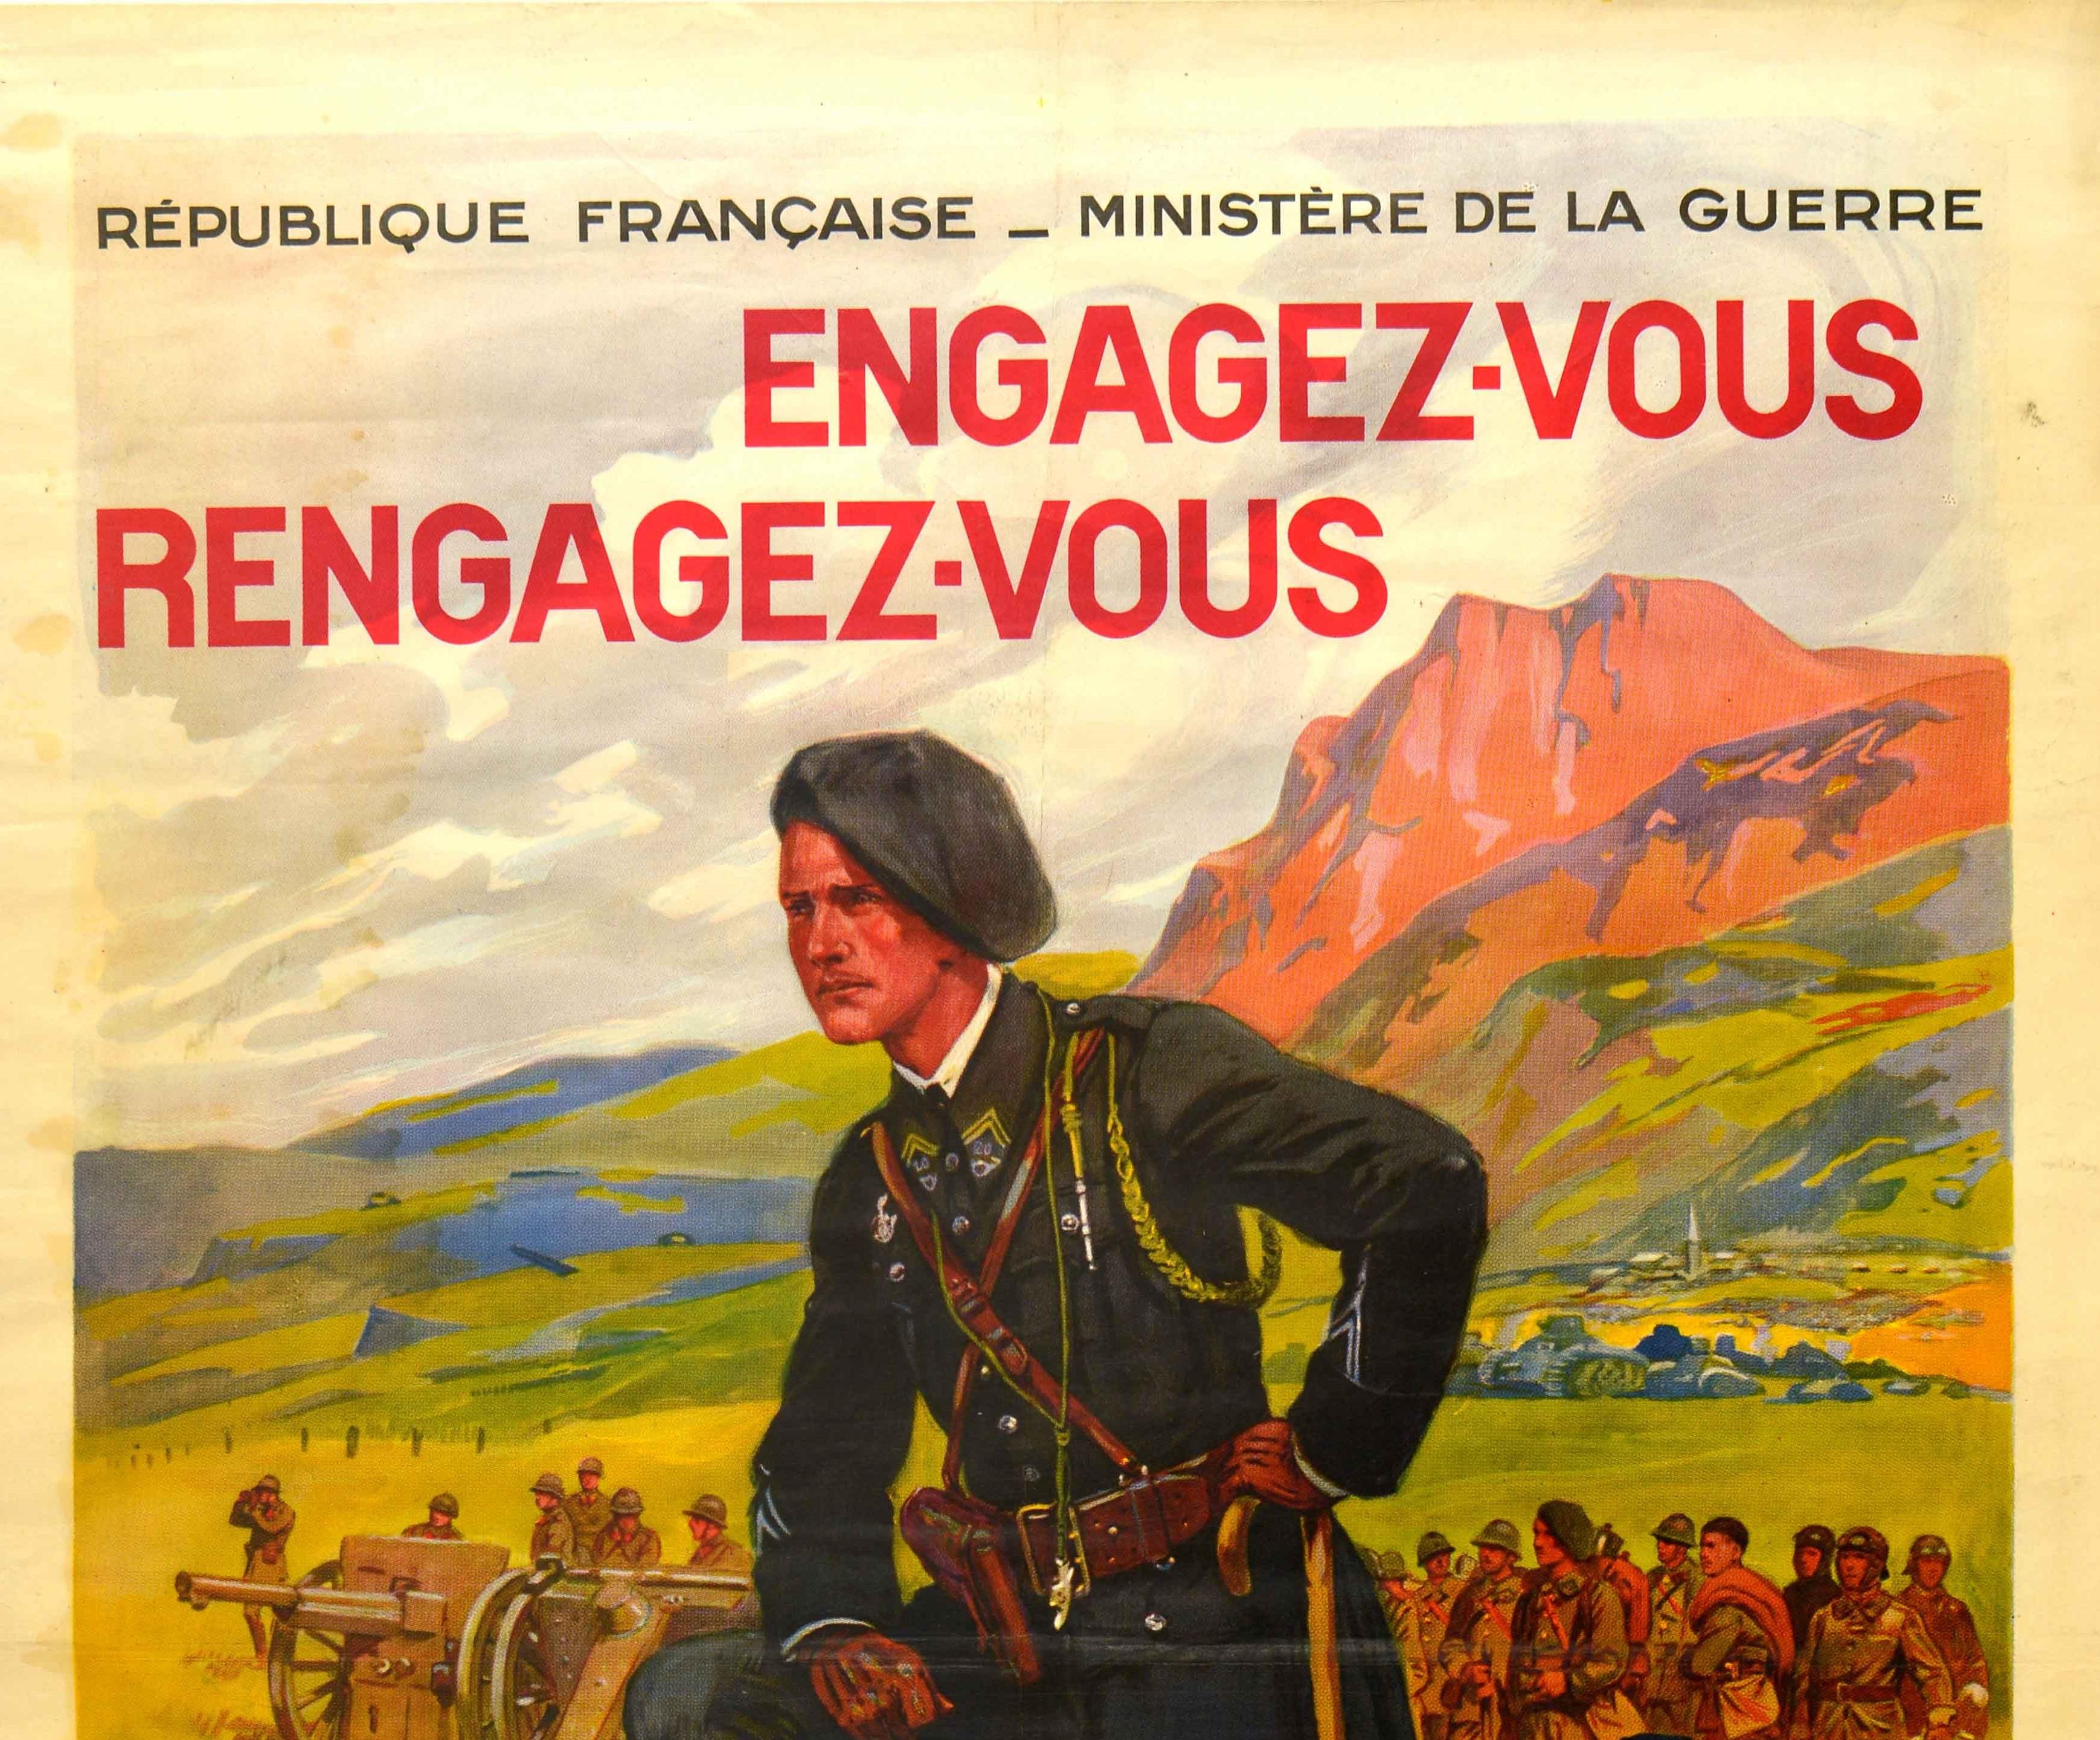 Original vintage French military recruitment poster - Join rejoin the Metropolitan Troops / Engagez-vous Rengagez-vous dans les Troupes Metropolitaines issued by the Republic of France Ministry of War featuring artwork by the French painter Maurice